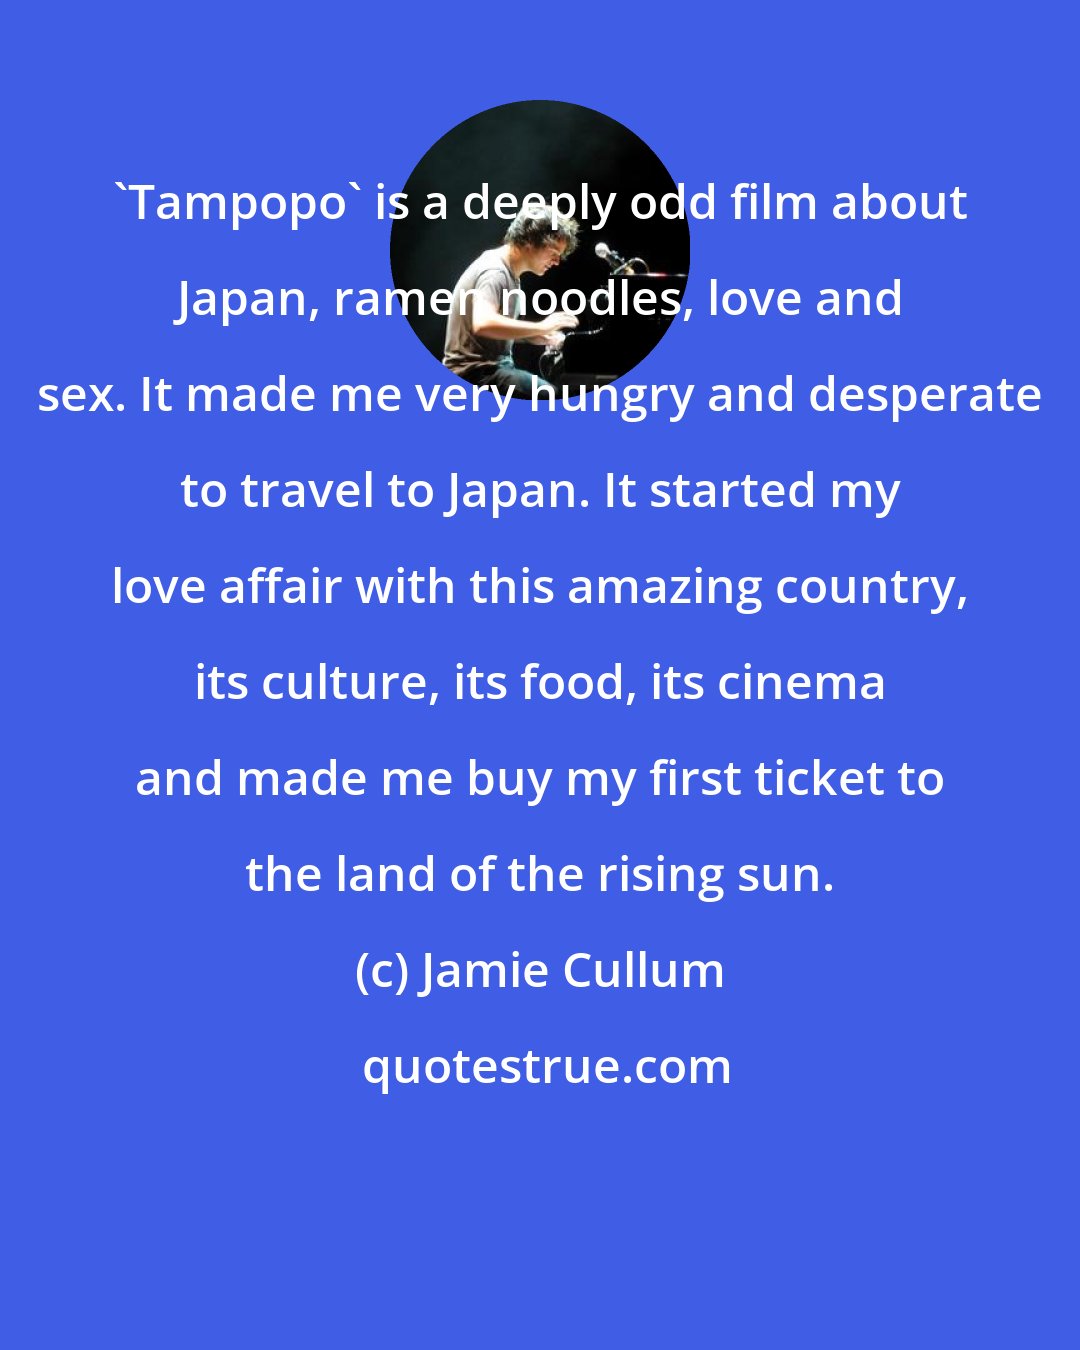 Jamie Cullum: 'Tampopo' is a deeply odd film about Japan, ramen noodles, love and sex. It made me very hungry and desperate to travel to Japan. It started my love affair with this amazing country, its culture, its food, its cinema and made me buy my first ticket to the land of the rising sun.